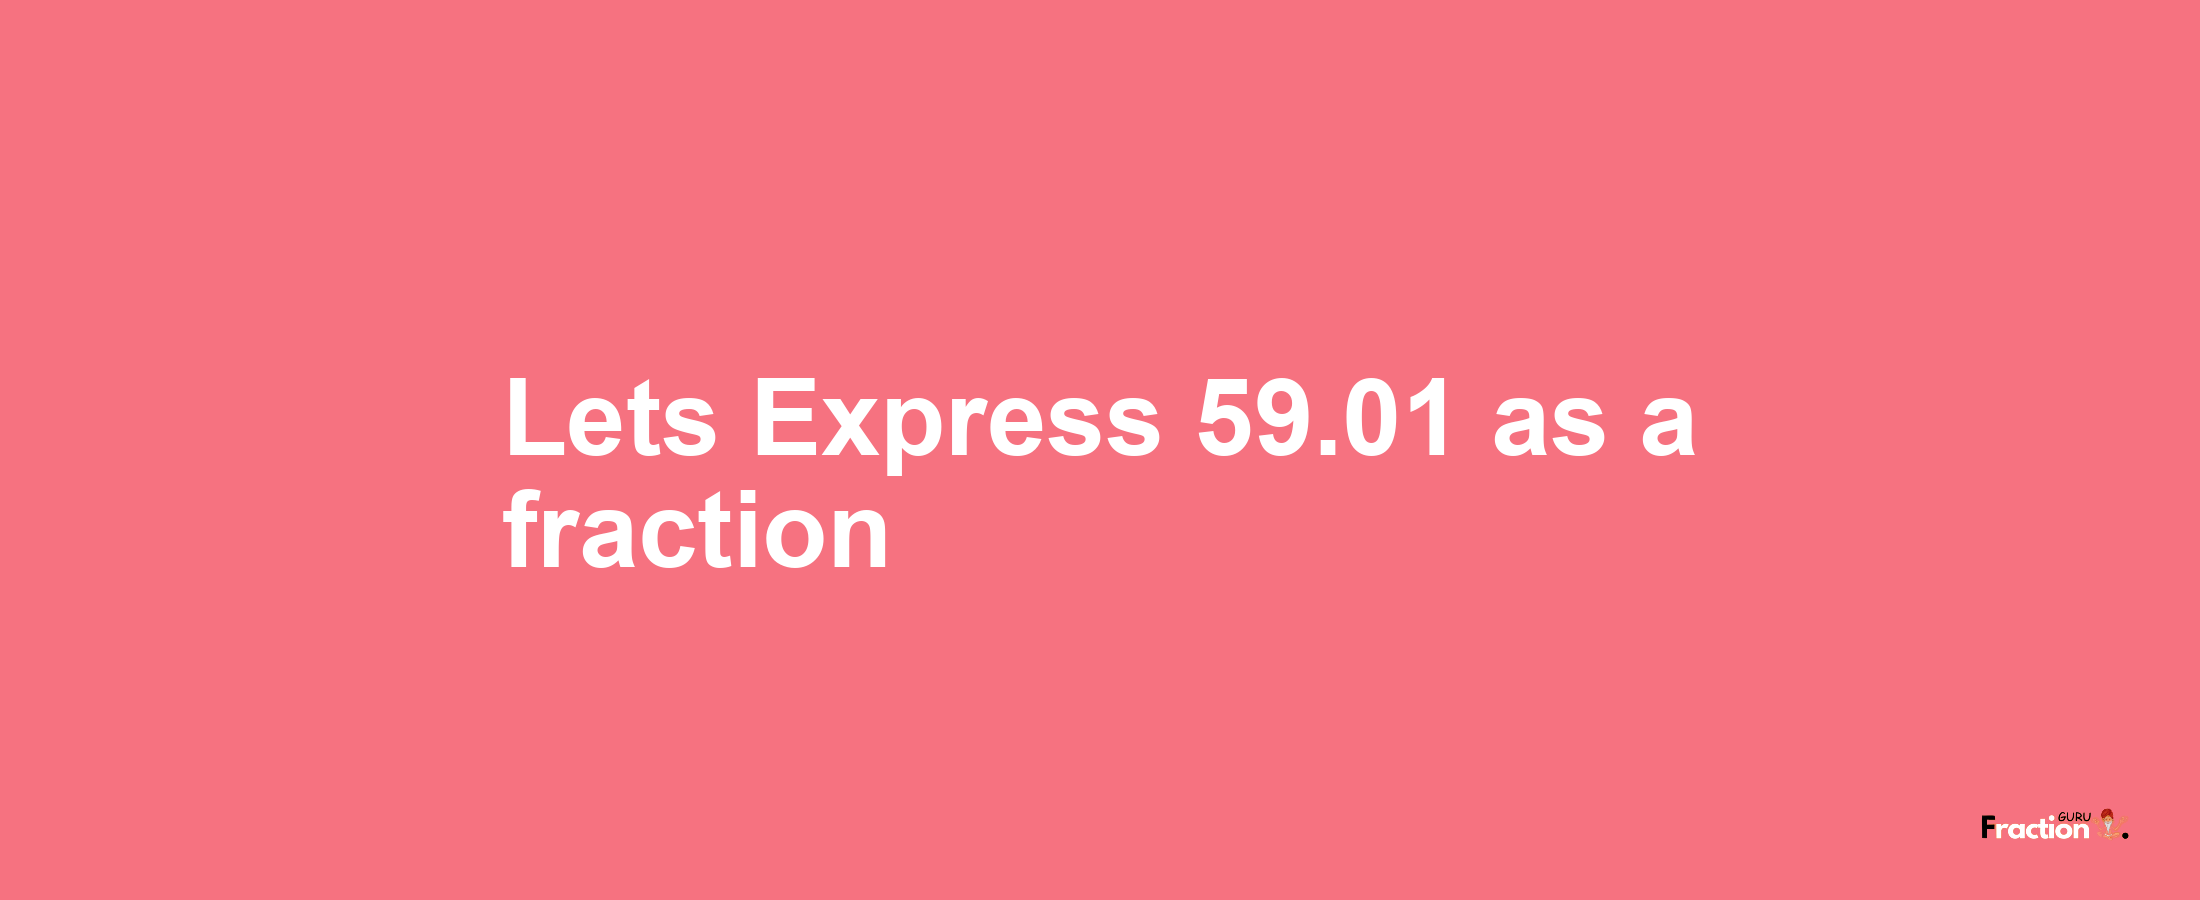 Lets Express 59.01 as afraction